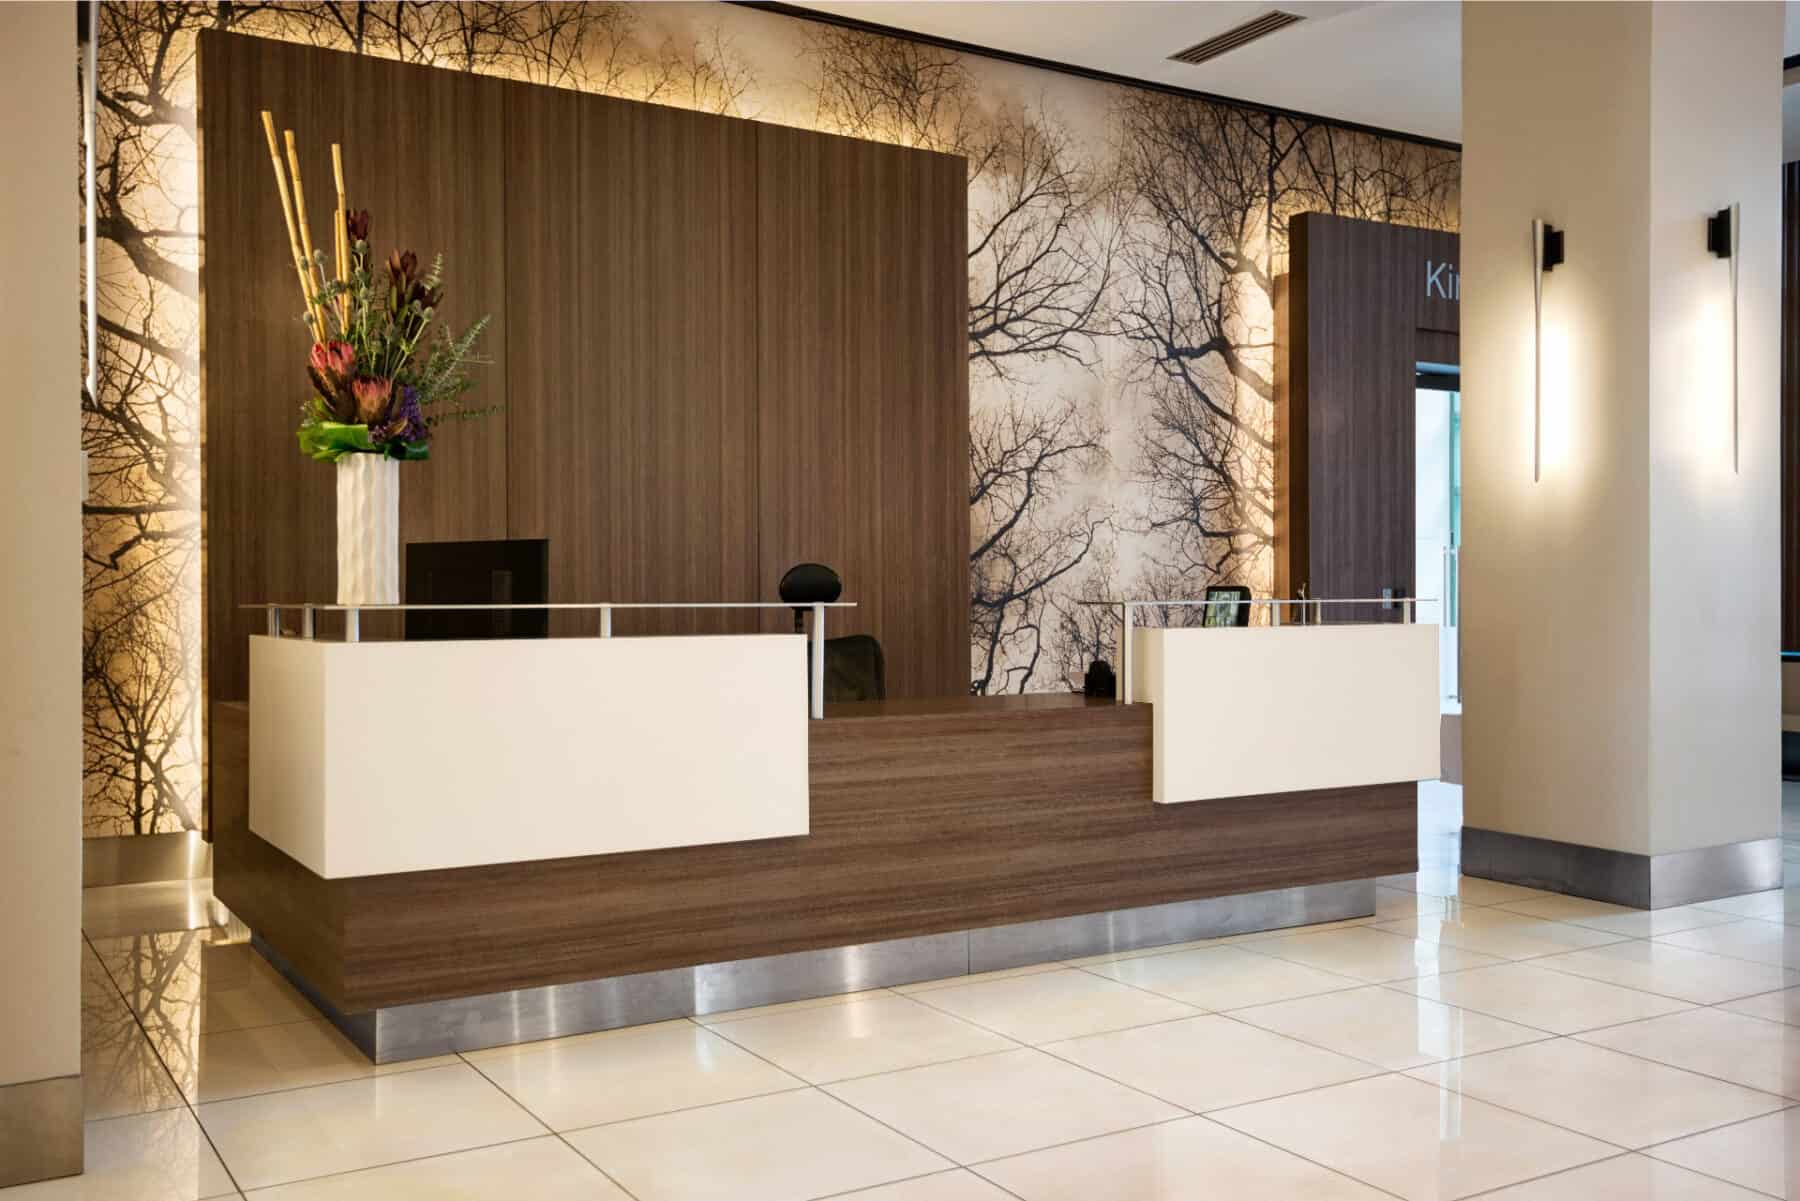 Custom Wood and Solid Surface Reception Desk with Metal Details fromConstruction Specialty Projects by Commercial Builder & General Contractor Structural Enterprises